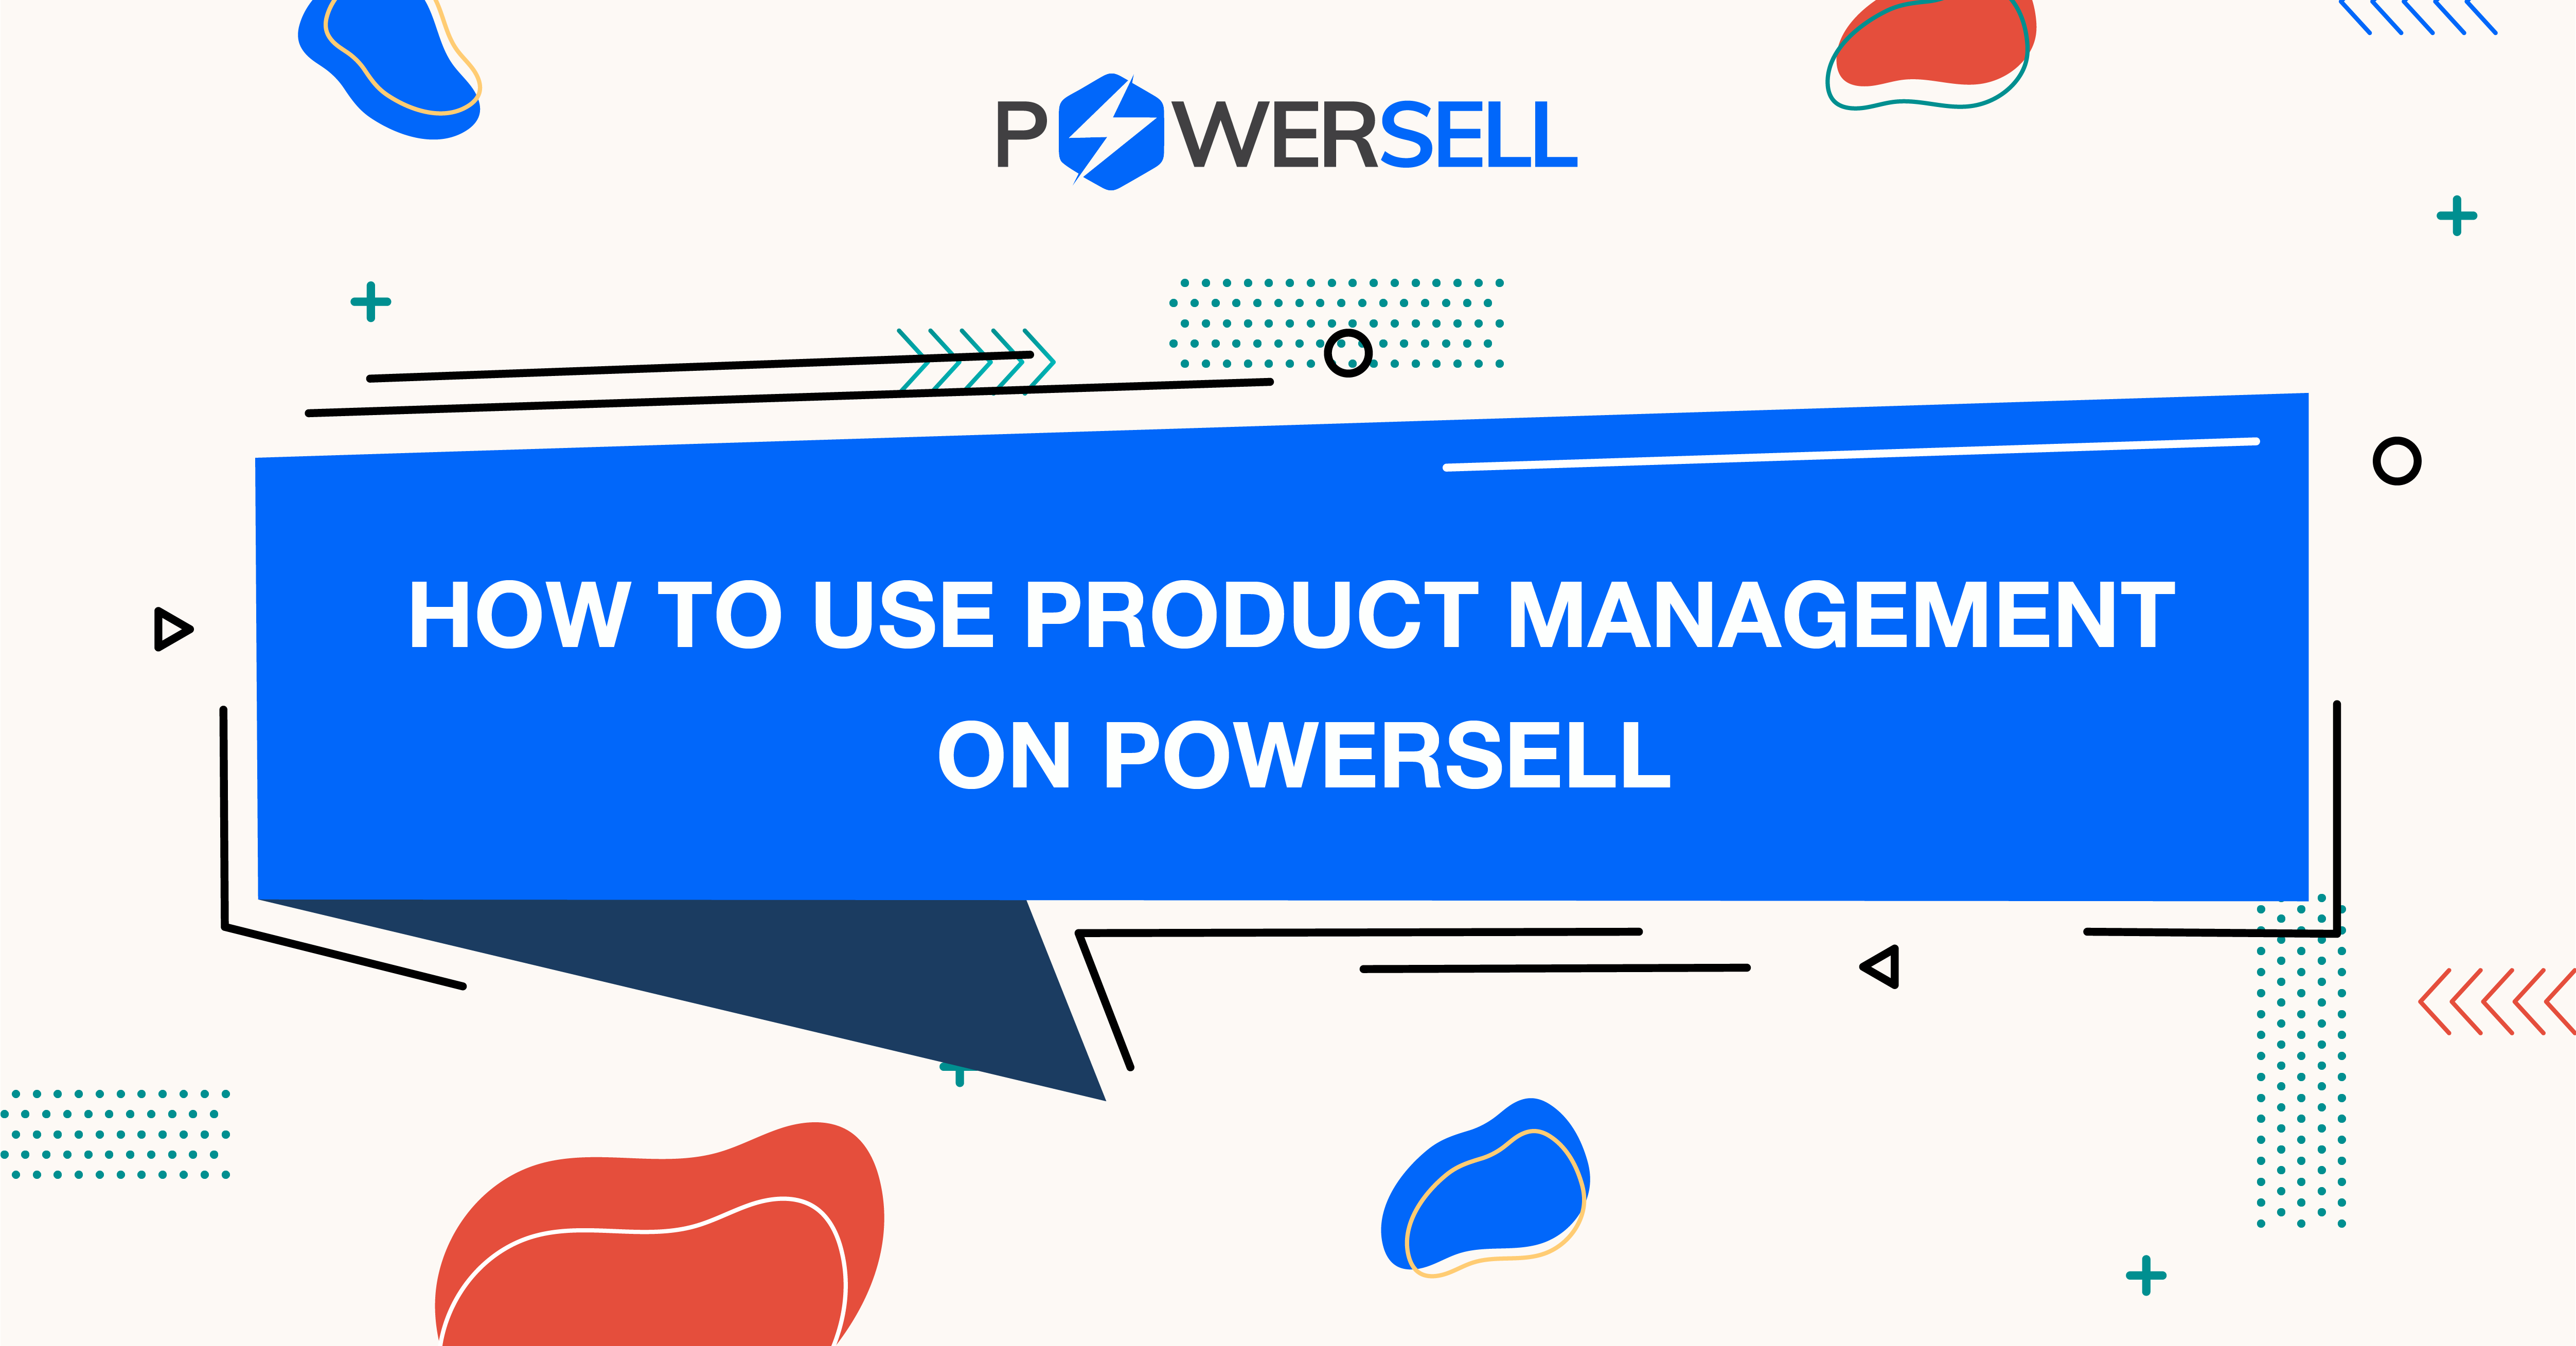 How to use product management on Powersell